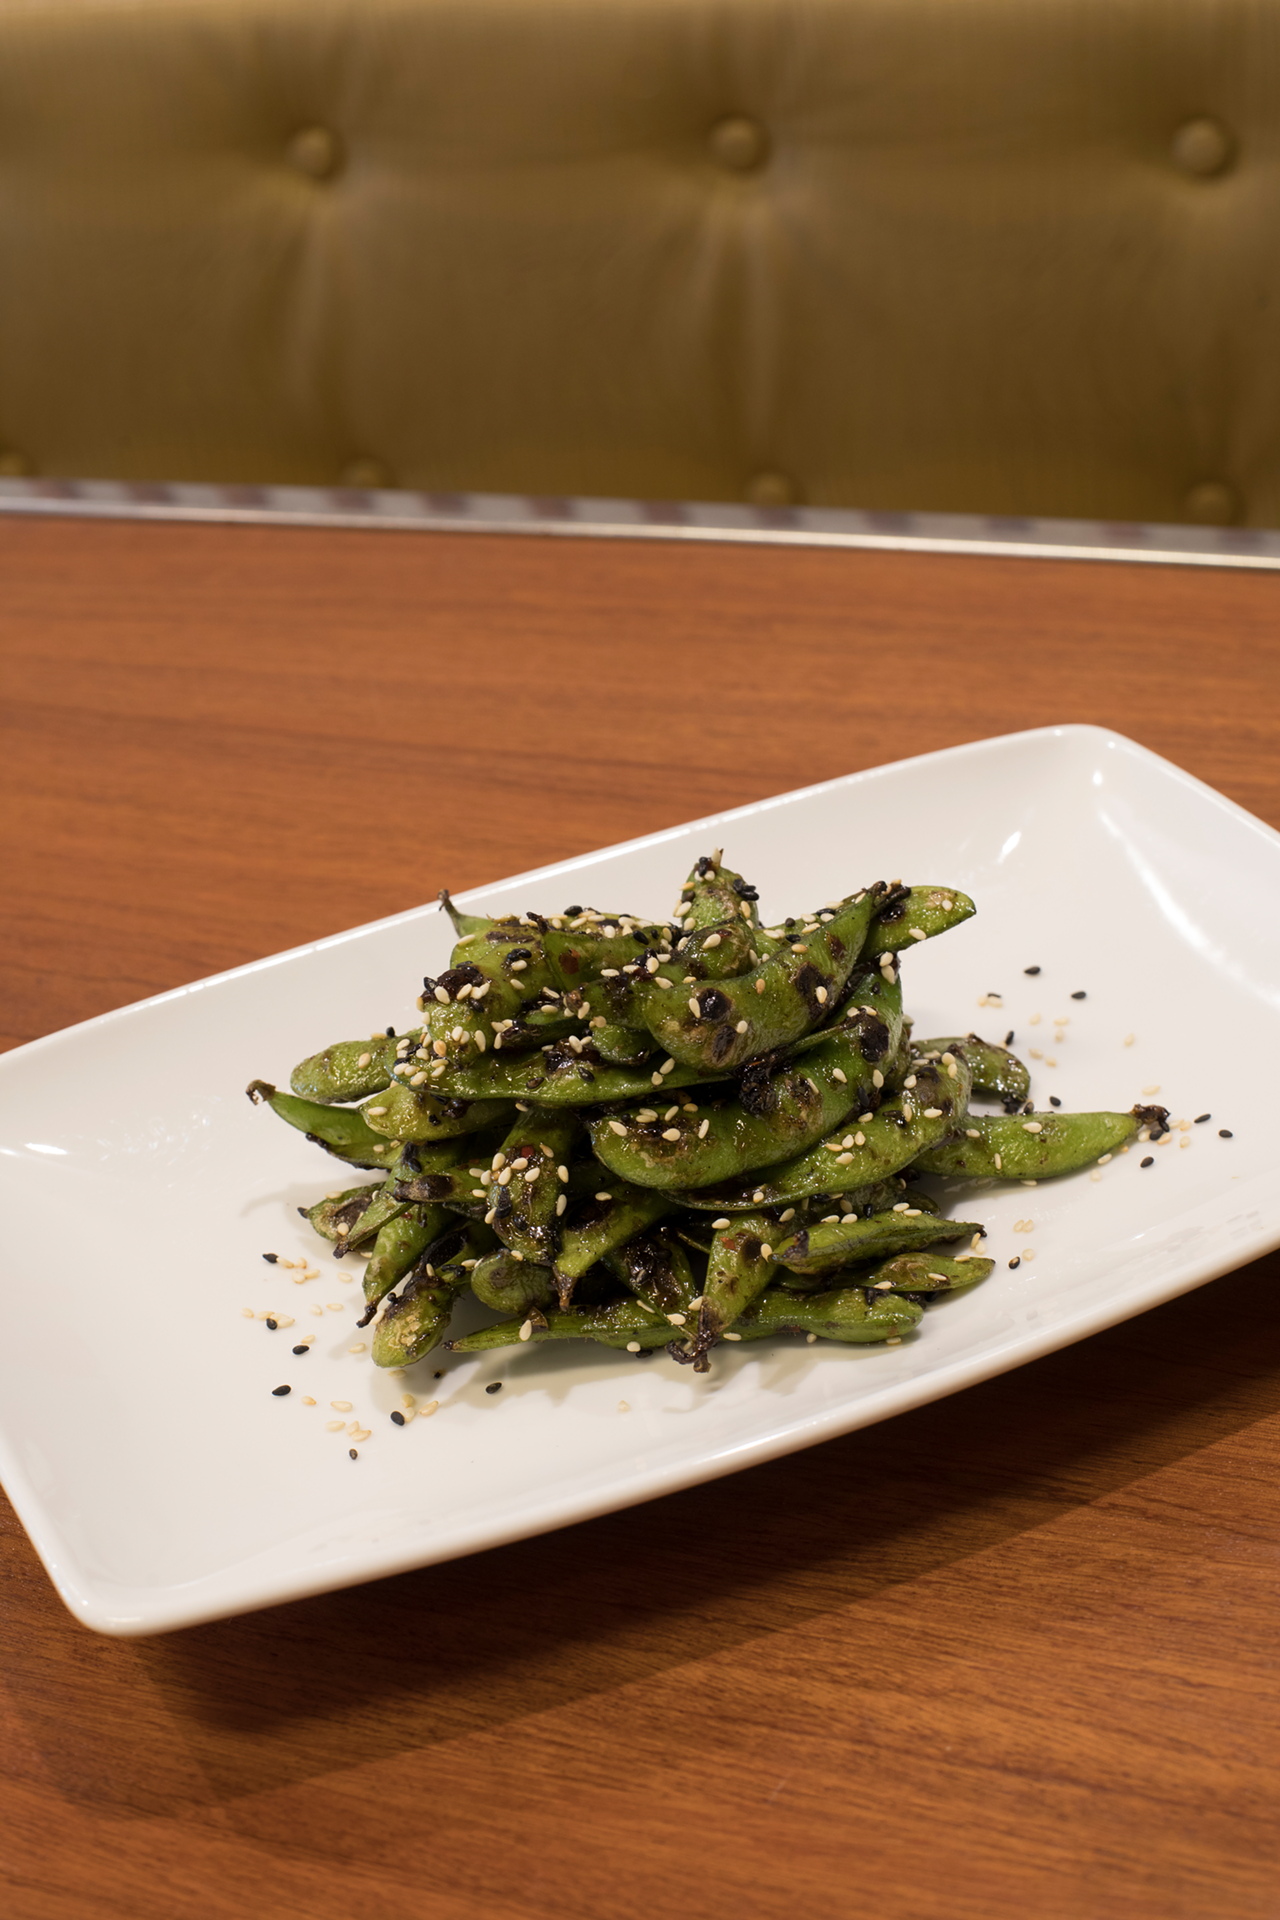 The downtown St. Pete restaurant's spicy garlic edamame are not to be missed.